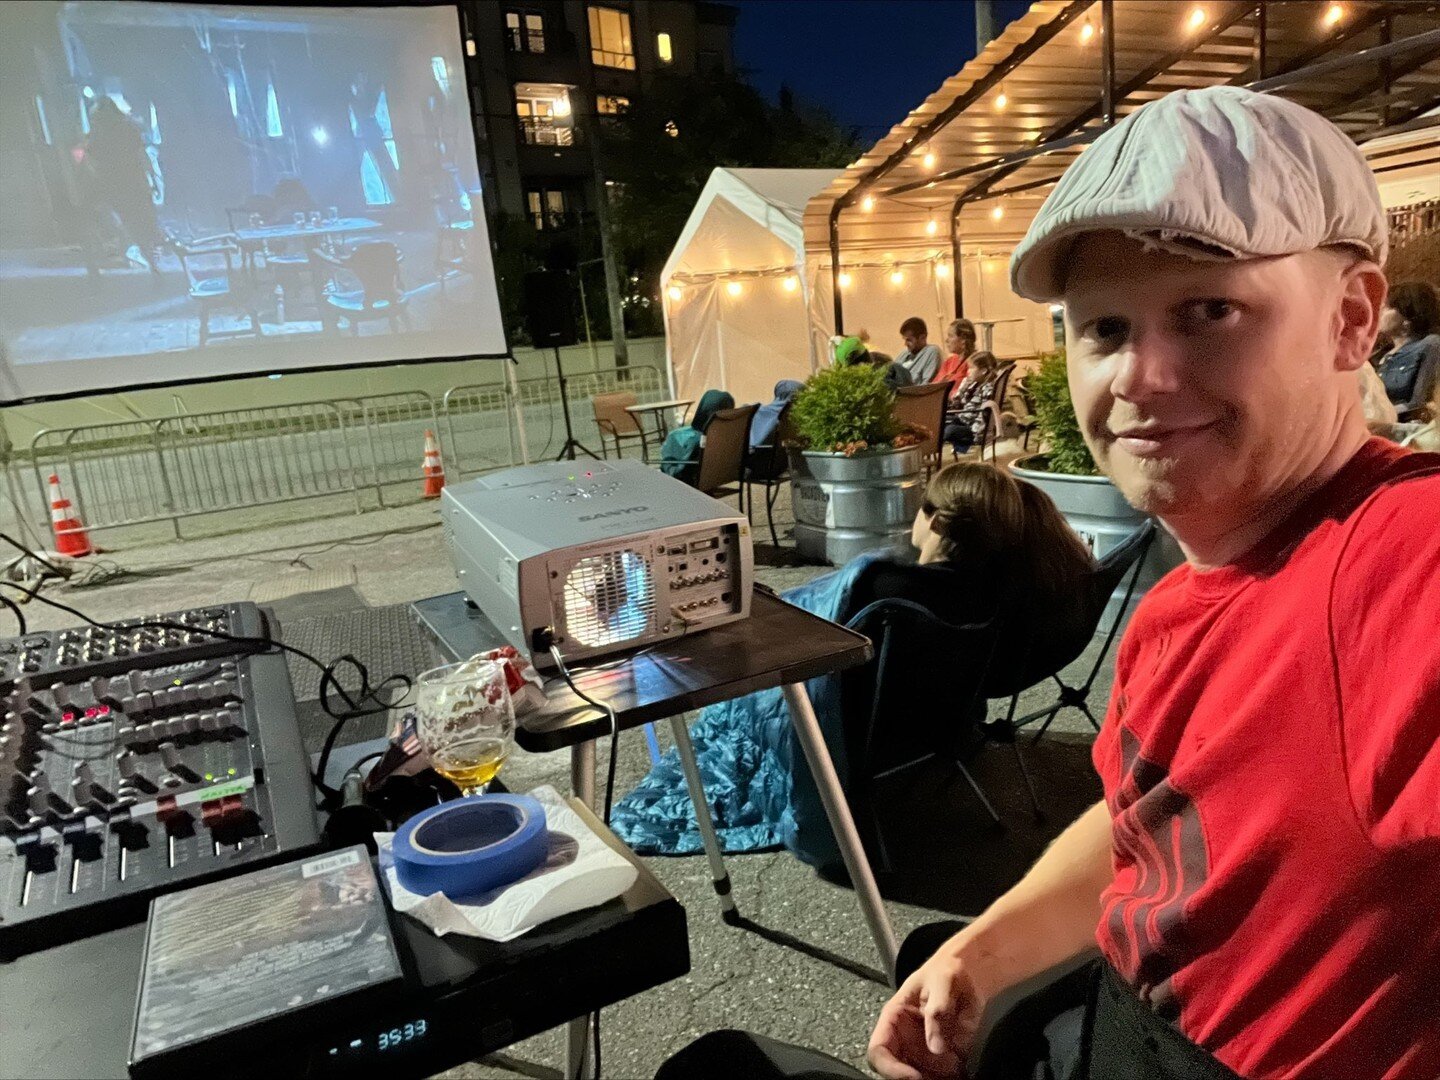 Happy Labor Day! Looking for something to do? Did you know our very own @ralston.david owns @broadviewtaphouse??? Here he is running movie night last week. Stop by for a cold one in the beer garden and stay for trivia night to flex that useless knowl